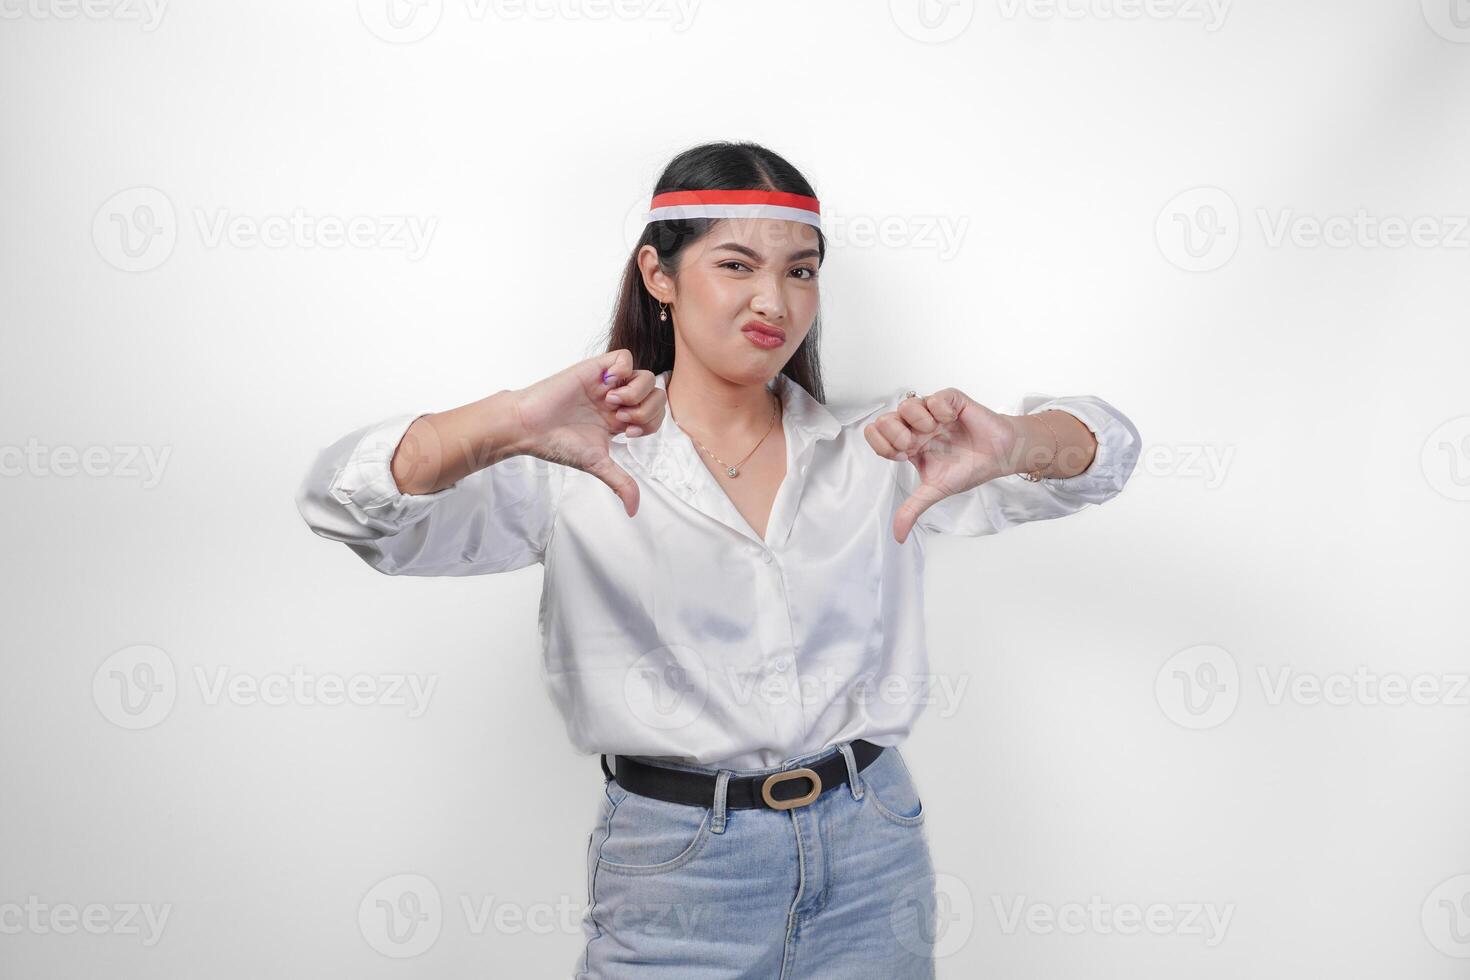 Unhappy Asian woman giving thumbs down gesture with negative expression and disapproval, wearing flag headband and white shirt standing over isolated white background photo